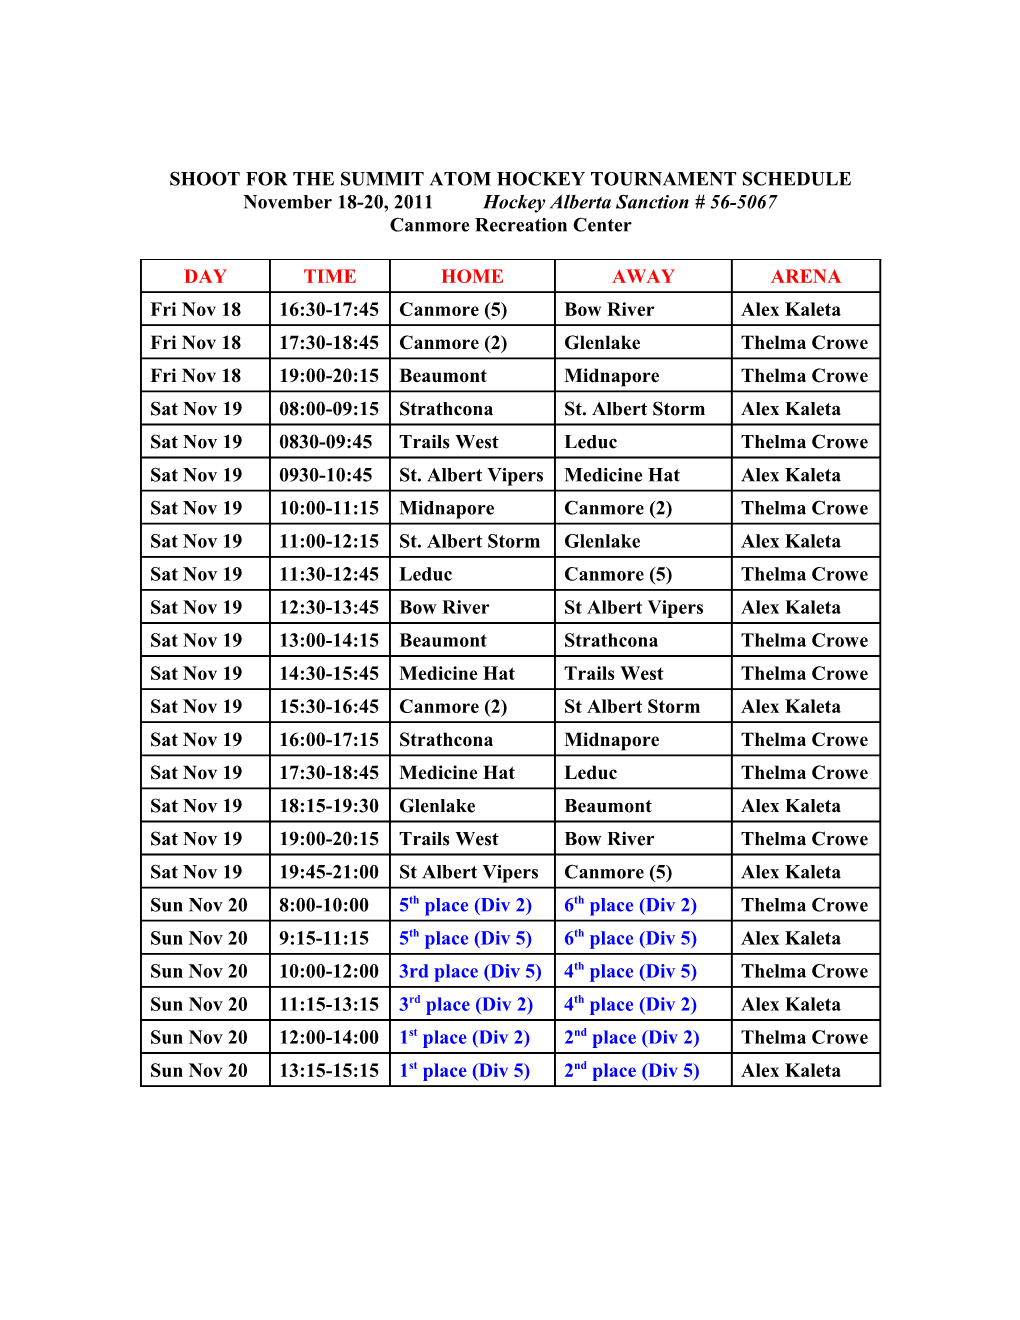 Shoot for the Summit Atom Hockey Tournament Schedule